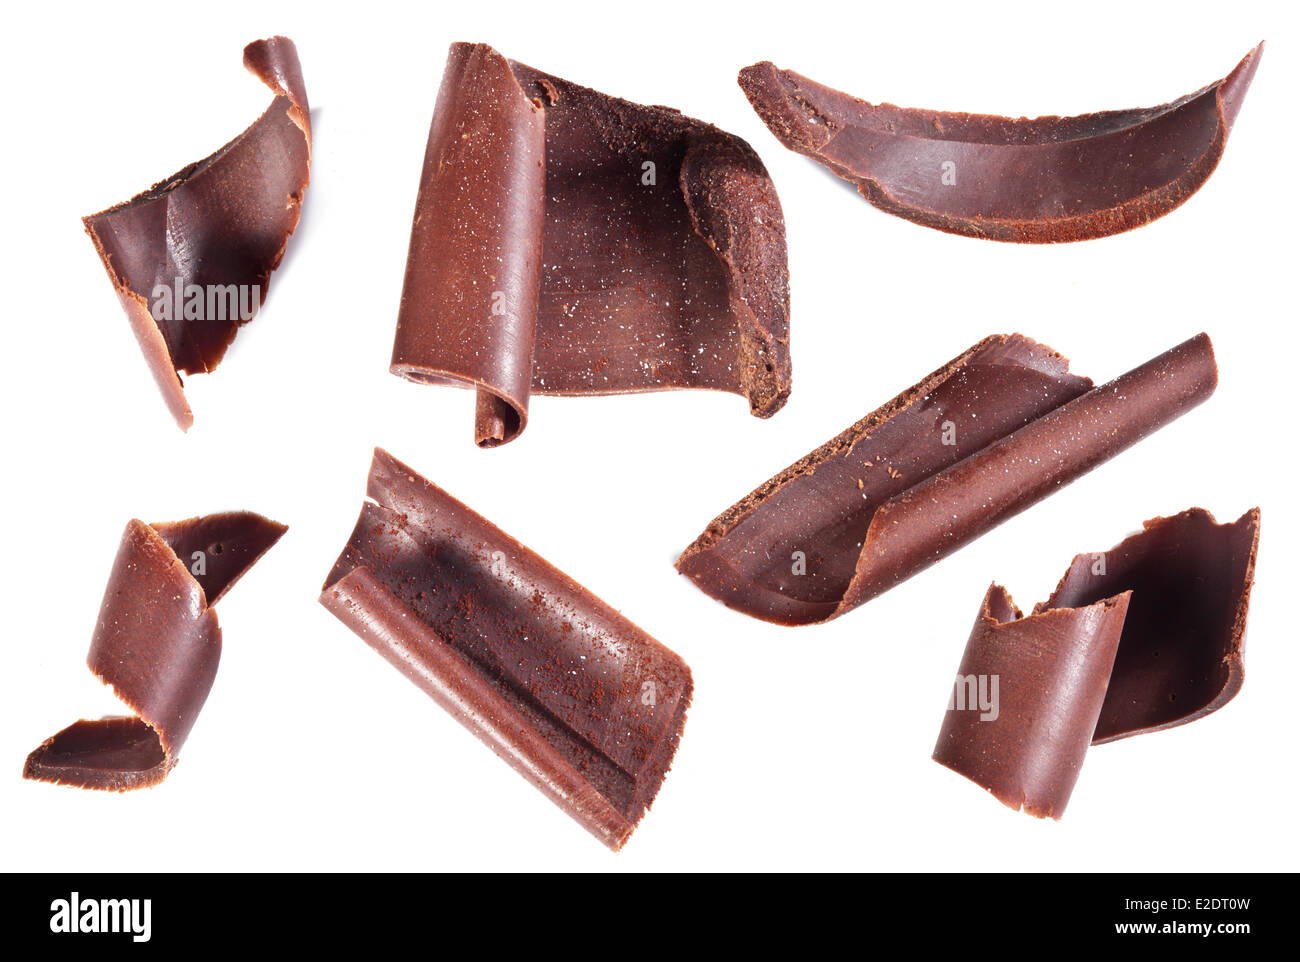 Chocolate chips isolated on a white background. Stock Photo